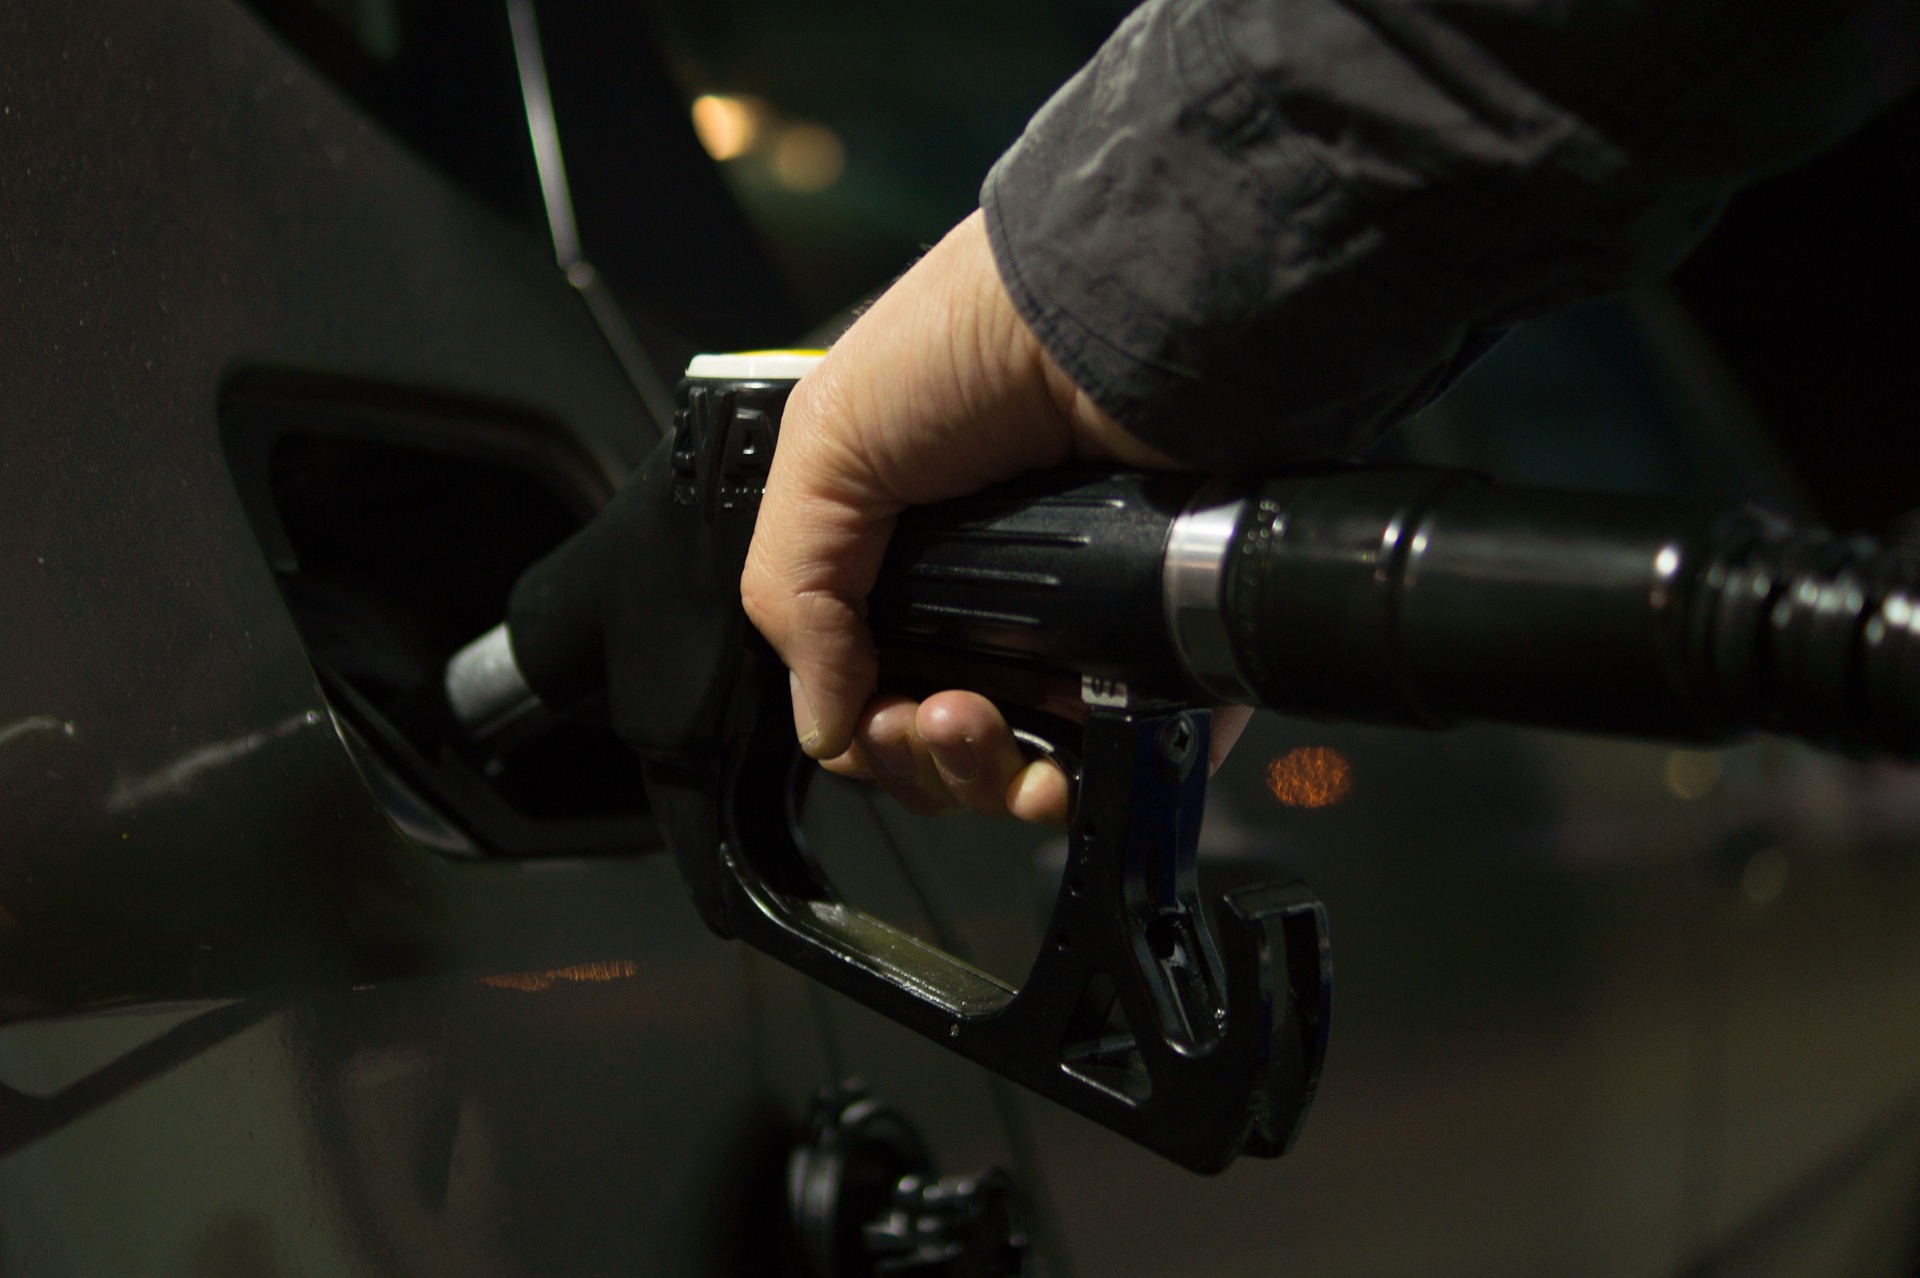 Fuel shortage forces drivers to buy fuel wherever they get it